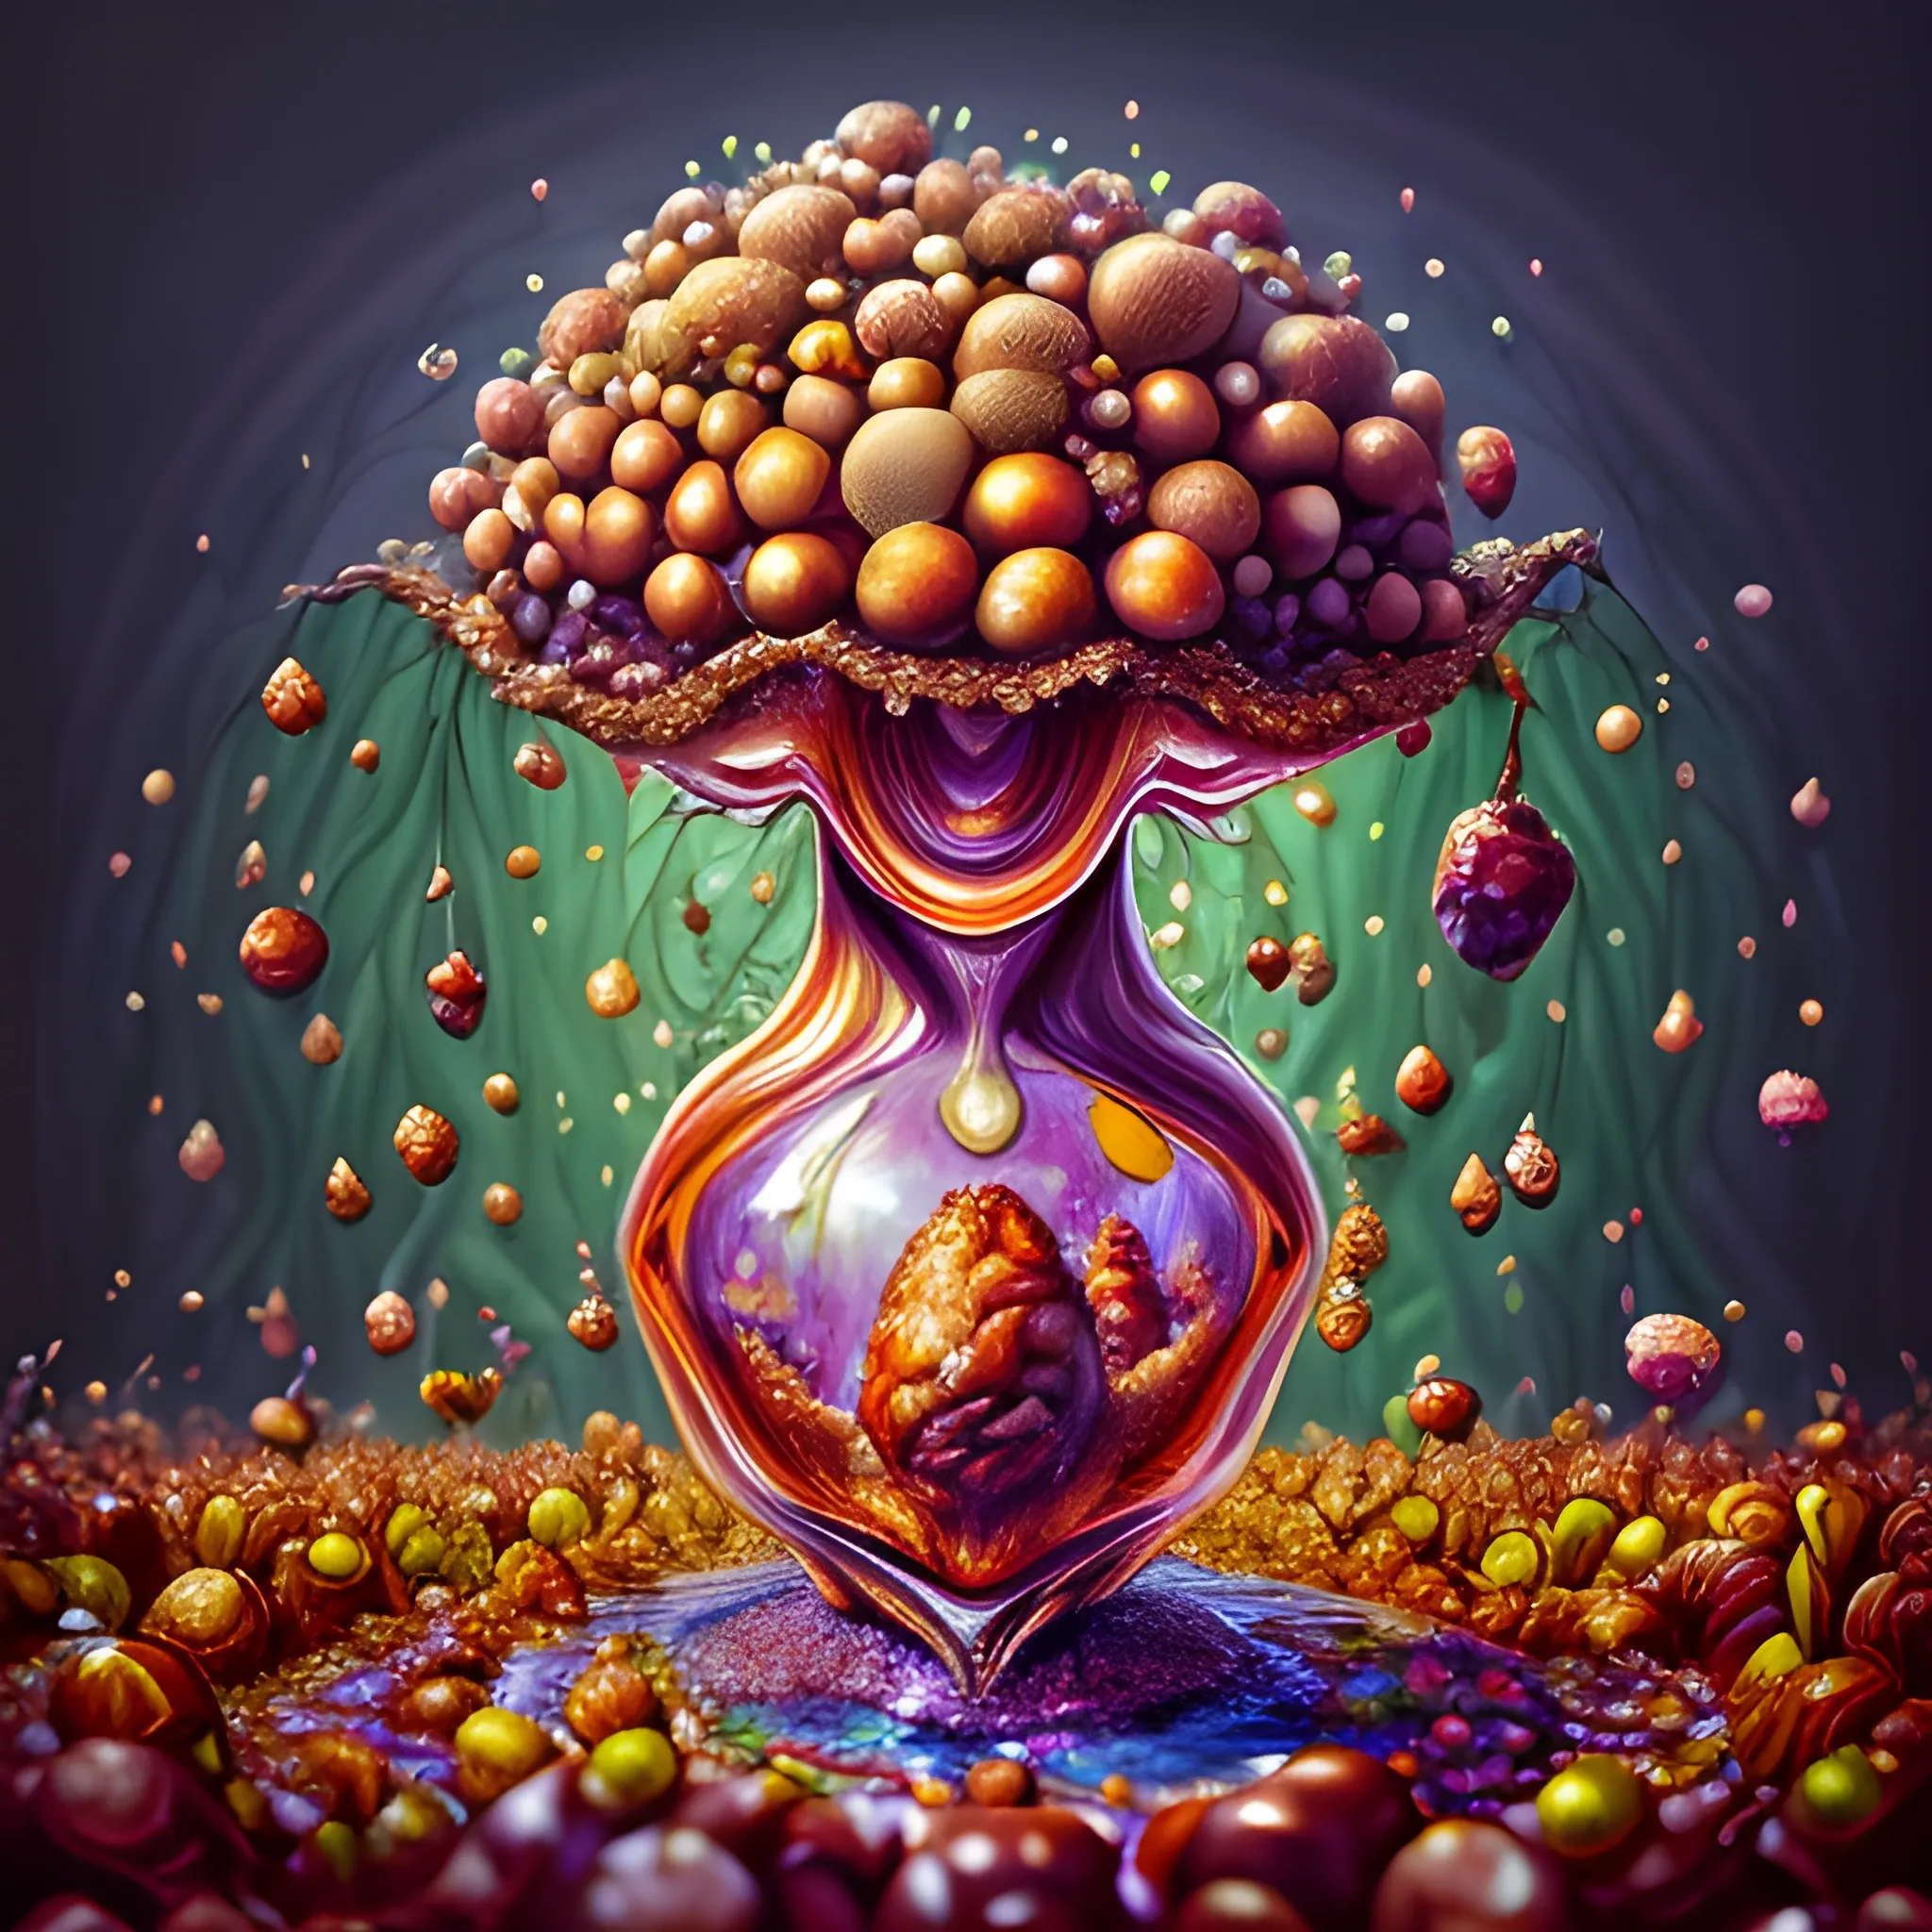 make a crystal statue of many crazy chestnuts look like whimsical female human face , close up, saturated colors, surrealism, chaotic background many chestnuts and chestnut leaves floating around  3D, Trippy, eerie atmosphere, close up, illustration, angular perspective, Oil Painting, Water Color